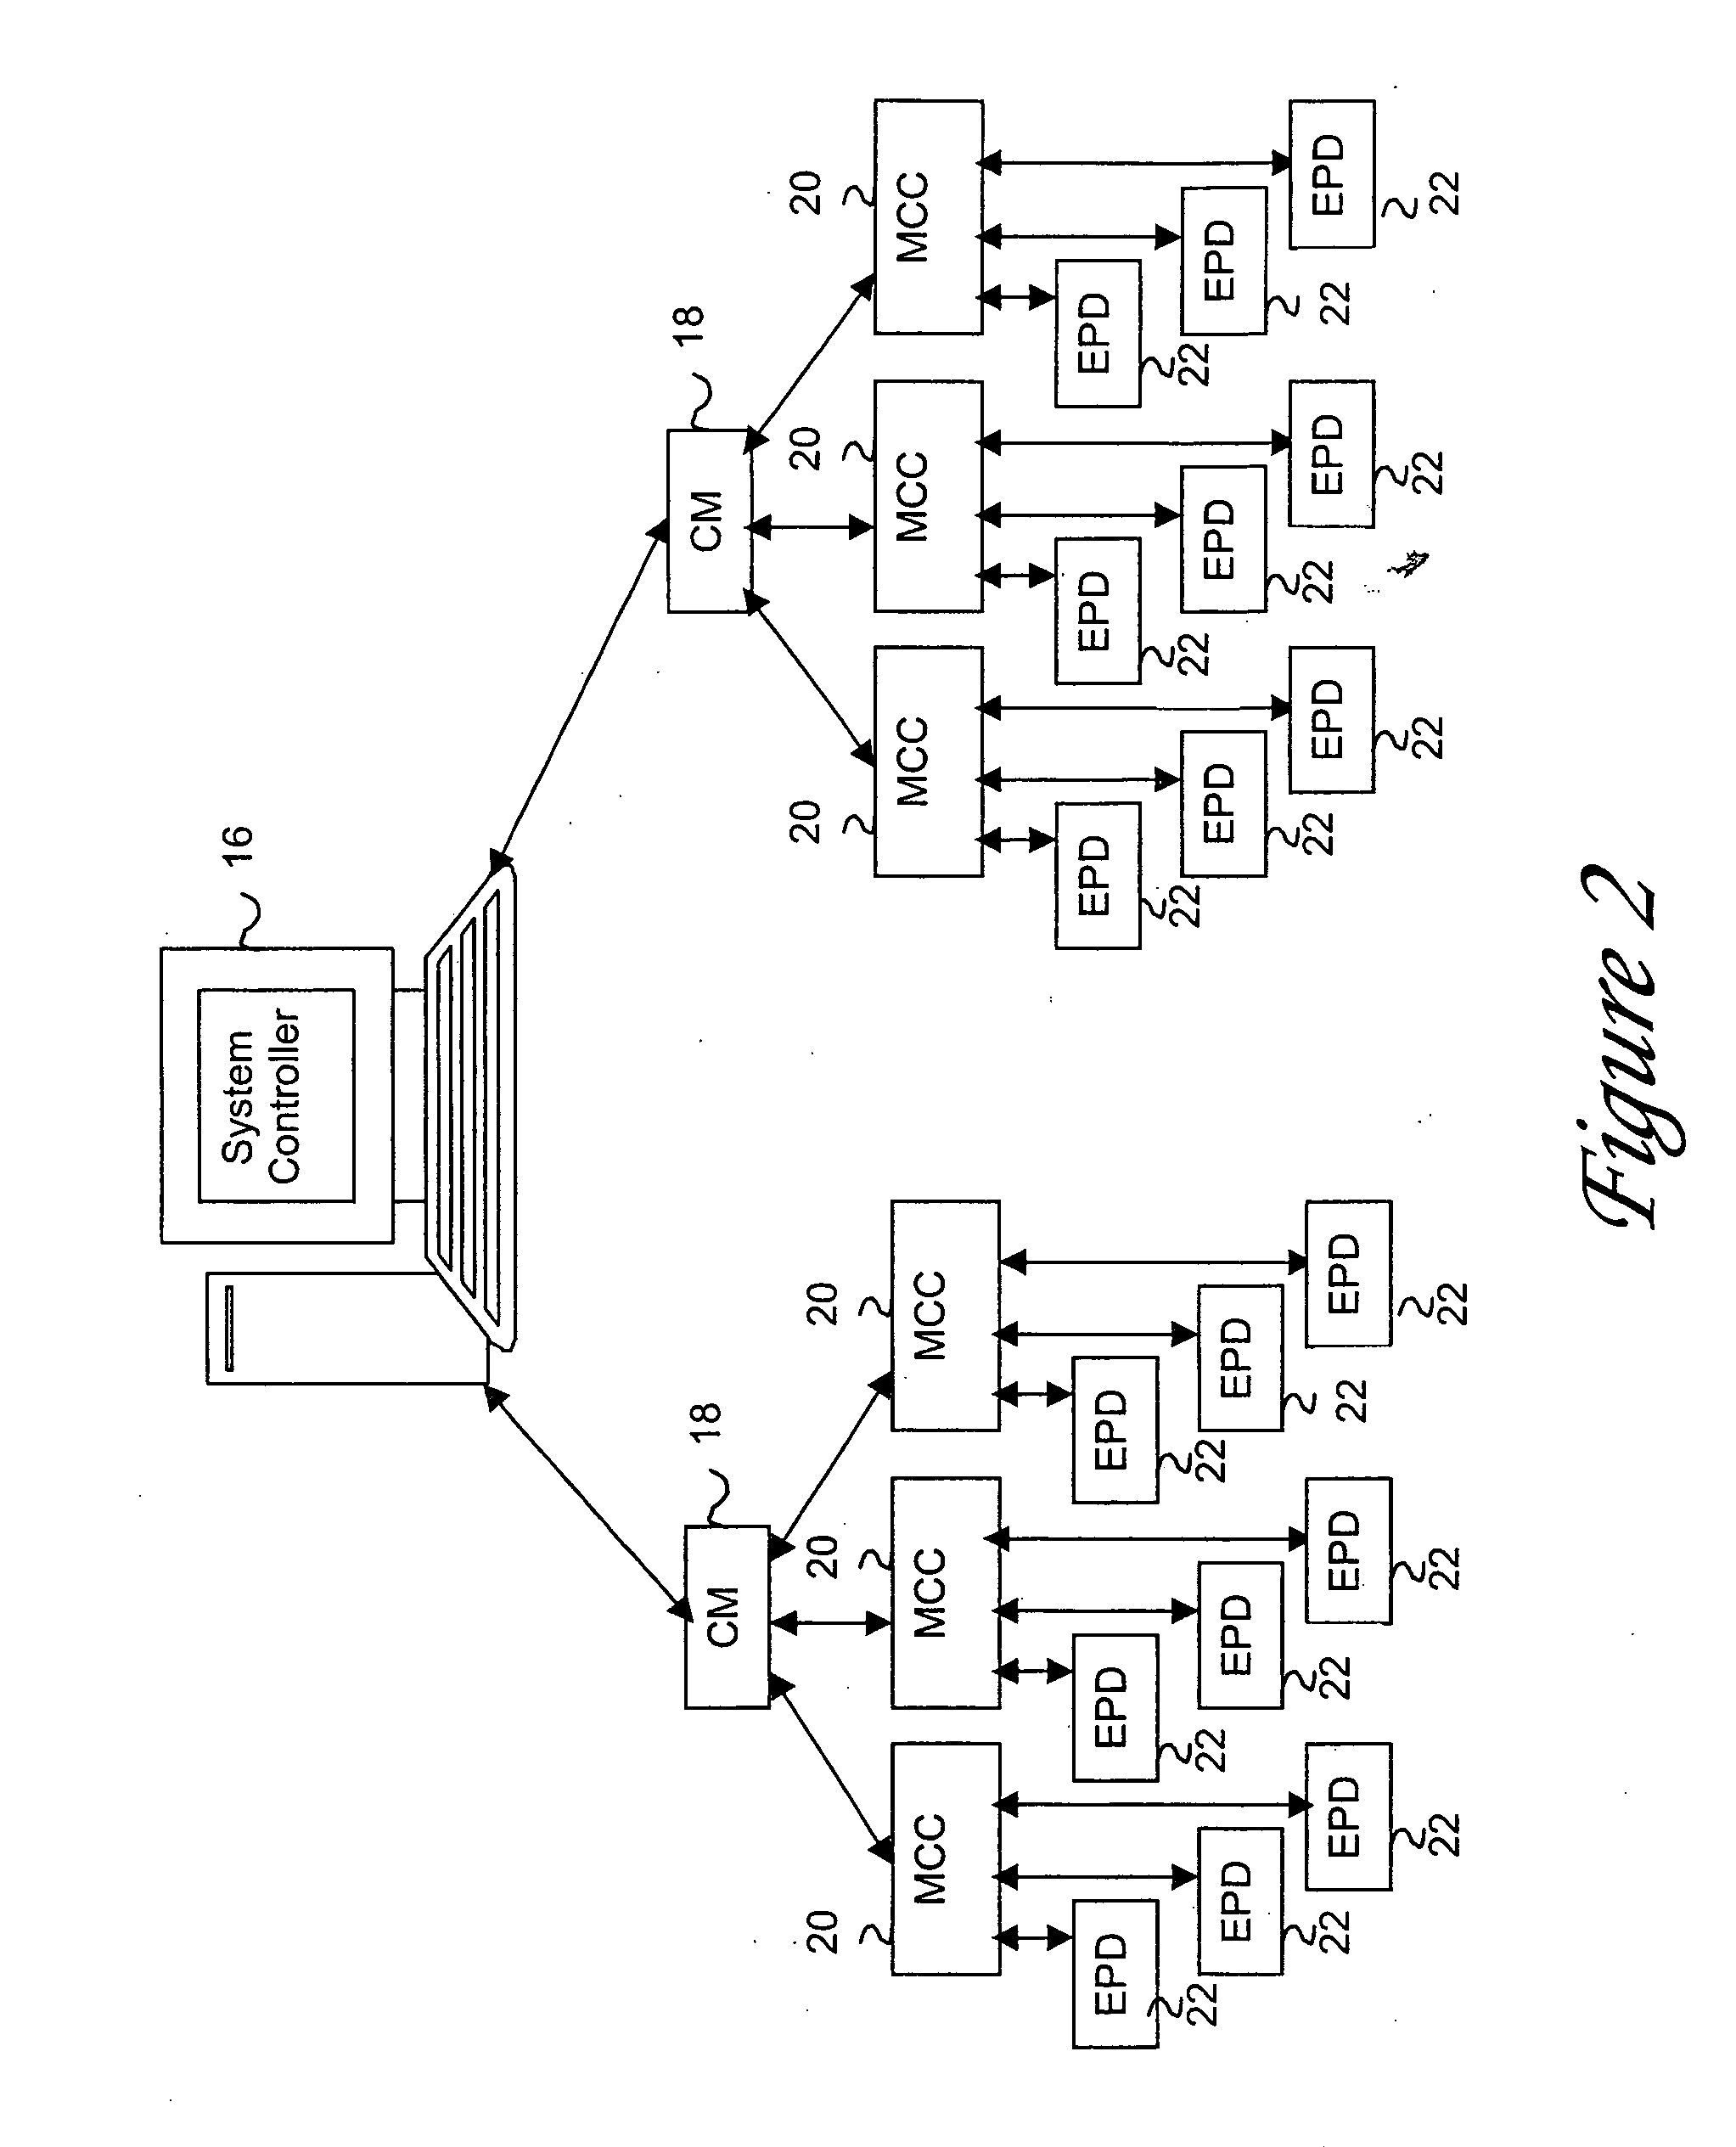 Interactive system for managing and remotely connecting customer utility loads